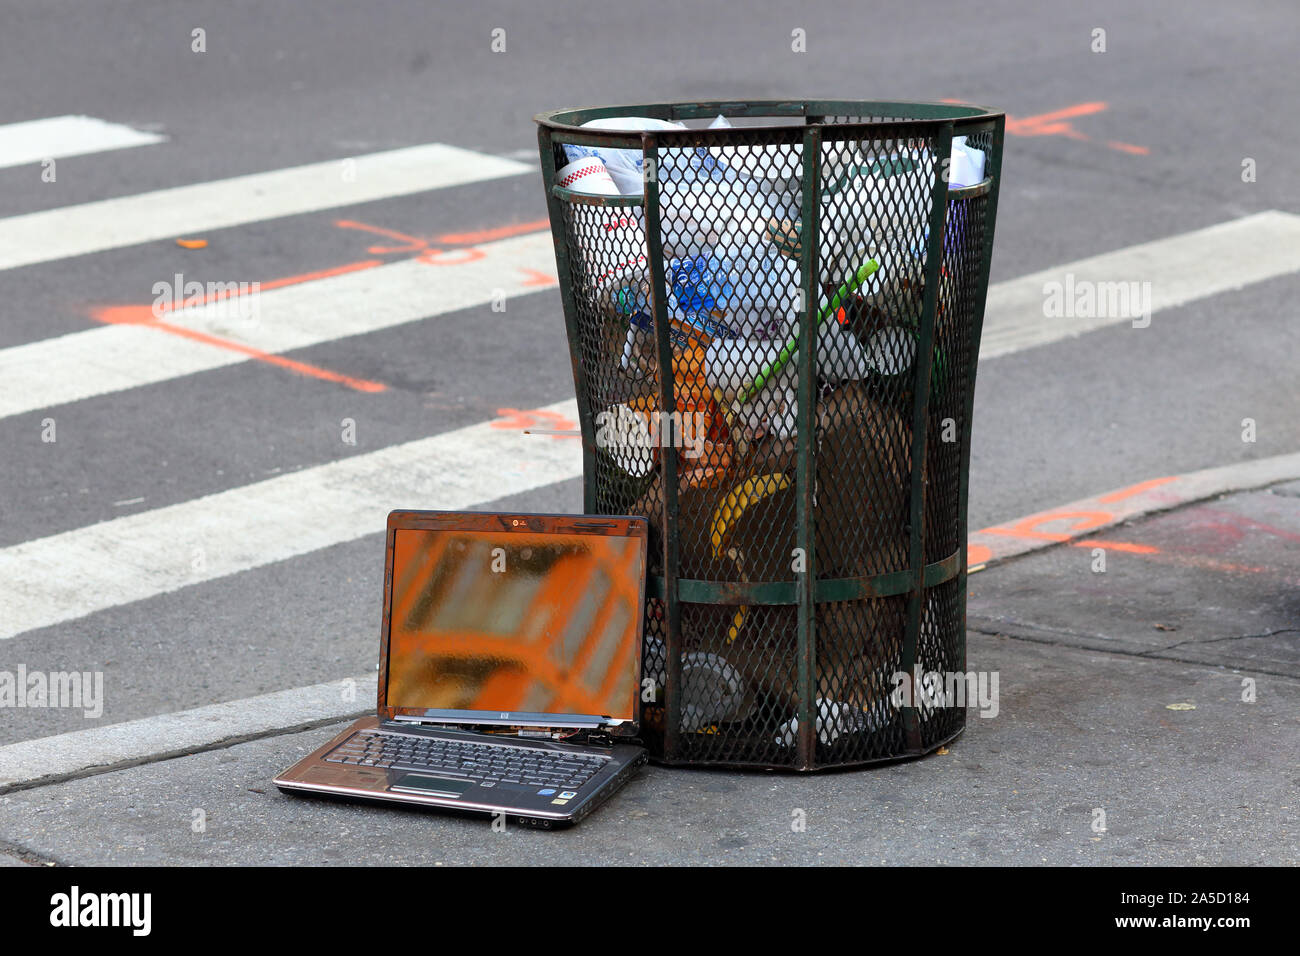 A broken laptop computer in the trash Stock Photo